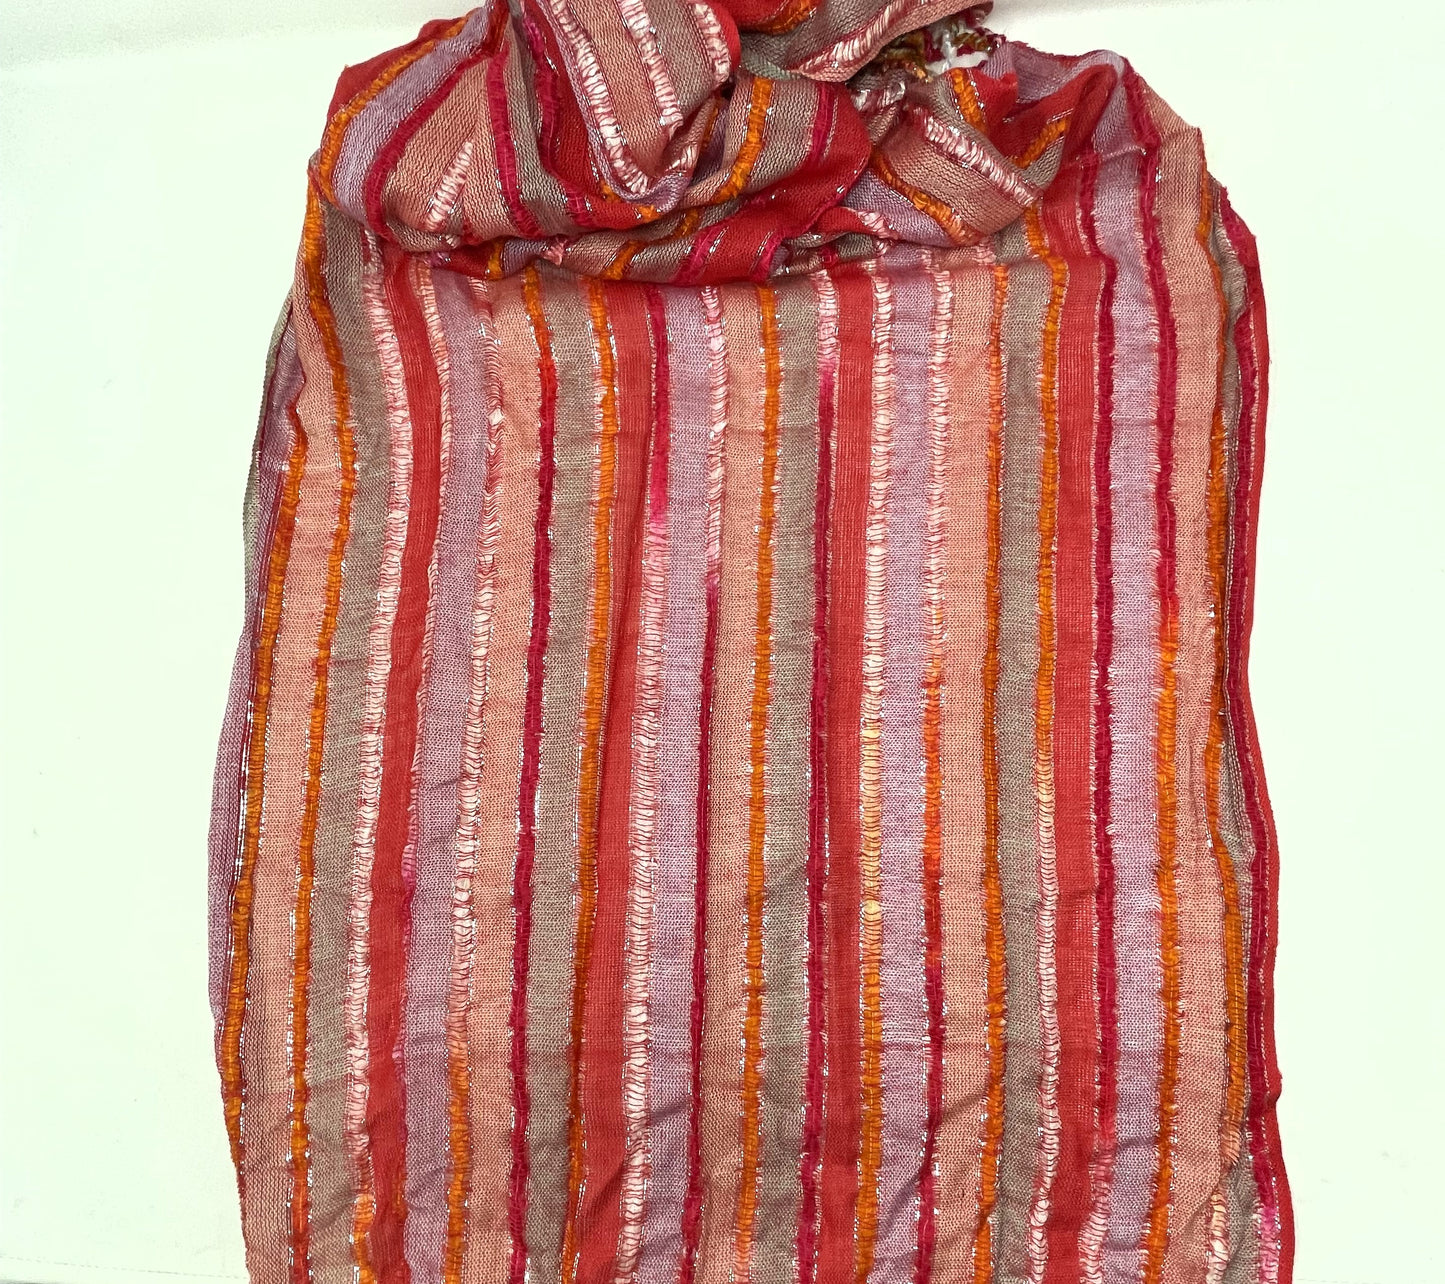 Beautiful reds with Silver Stripes Thin & Lightweight Fashion Scarf